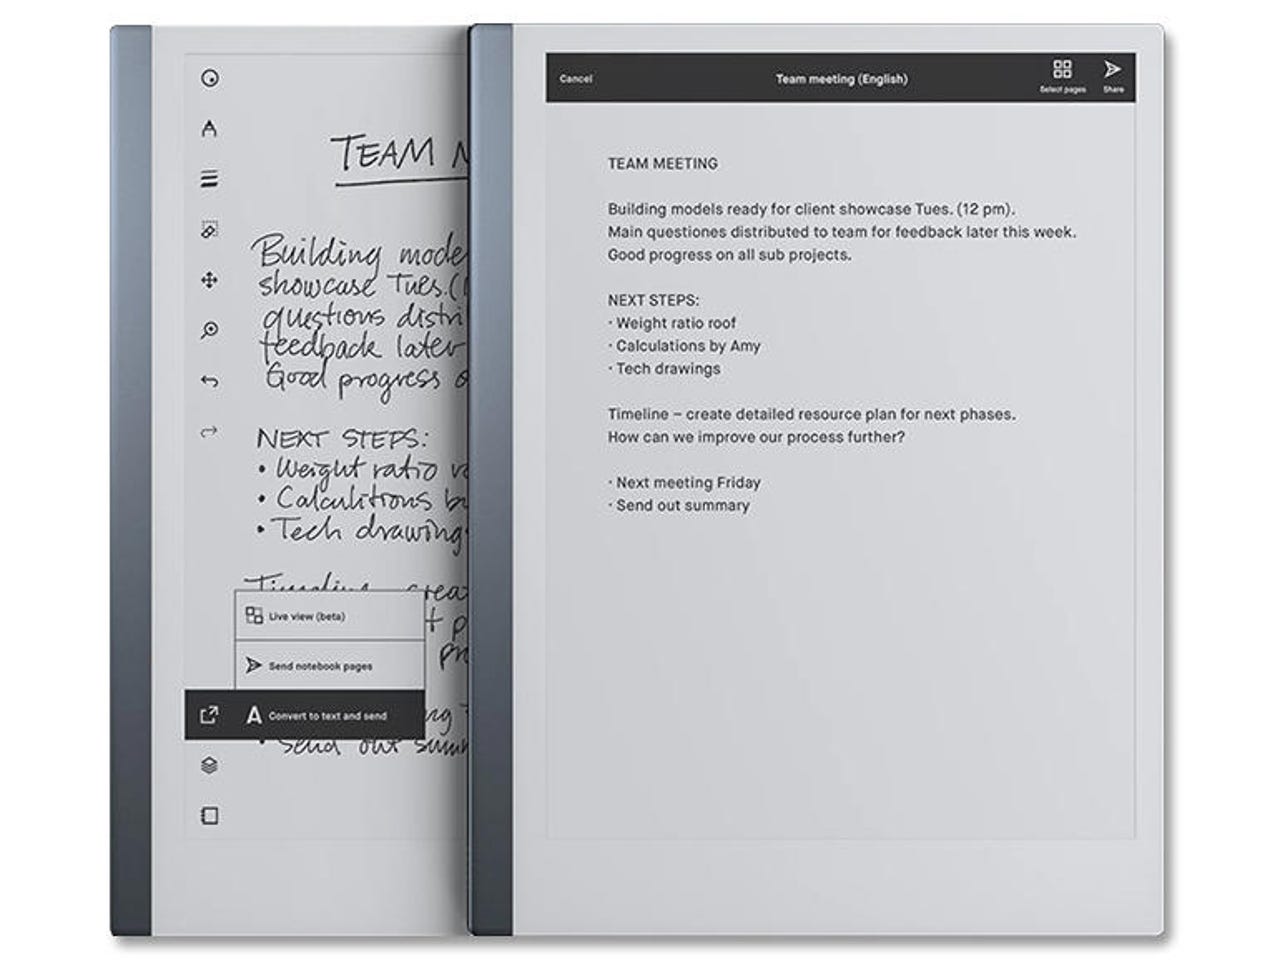 reMarkable 2 E-Ink tablet review: Superb for on-screen writing, but key  features are still missing